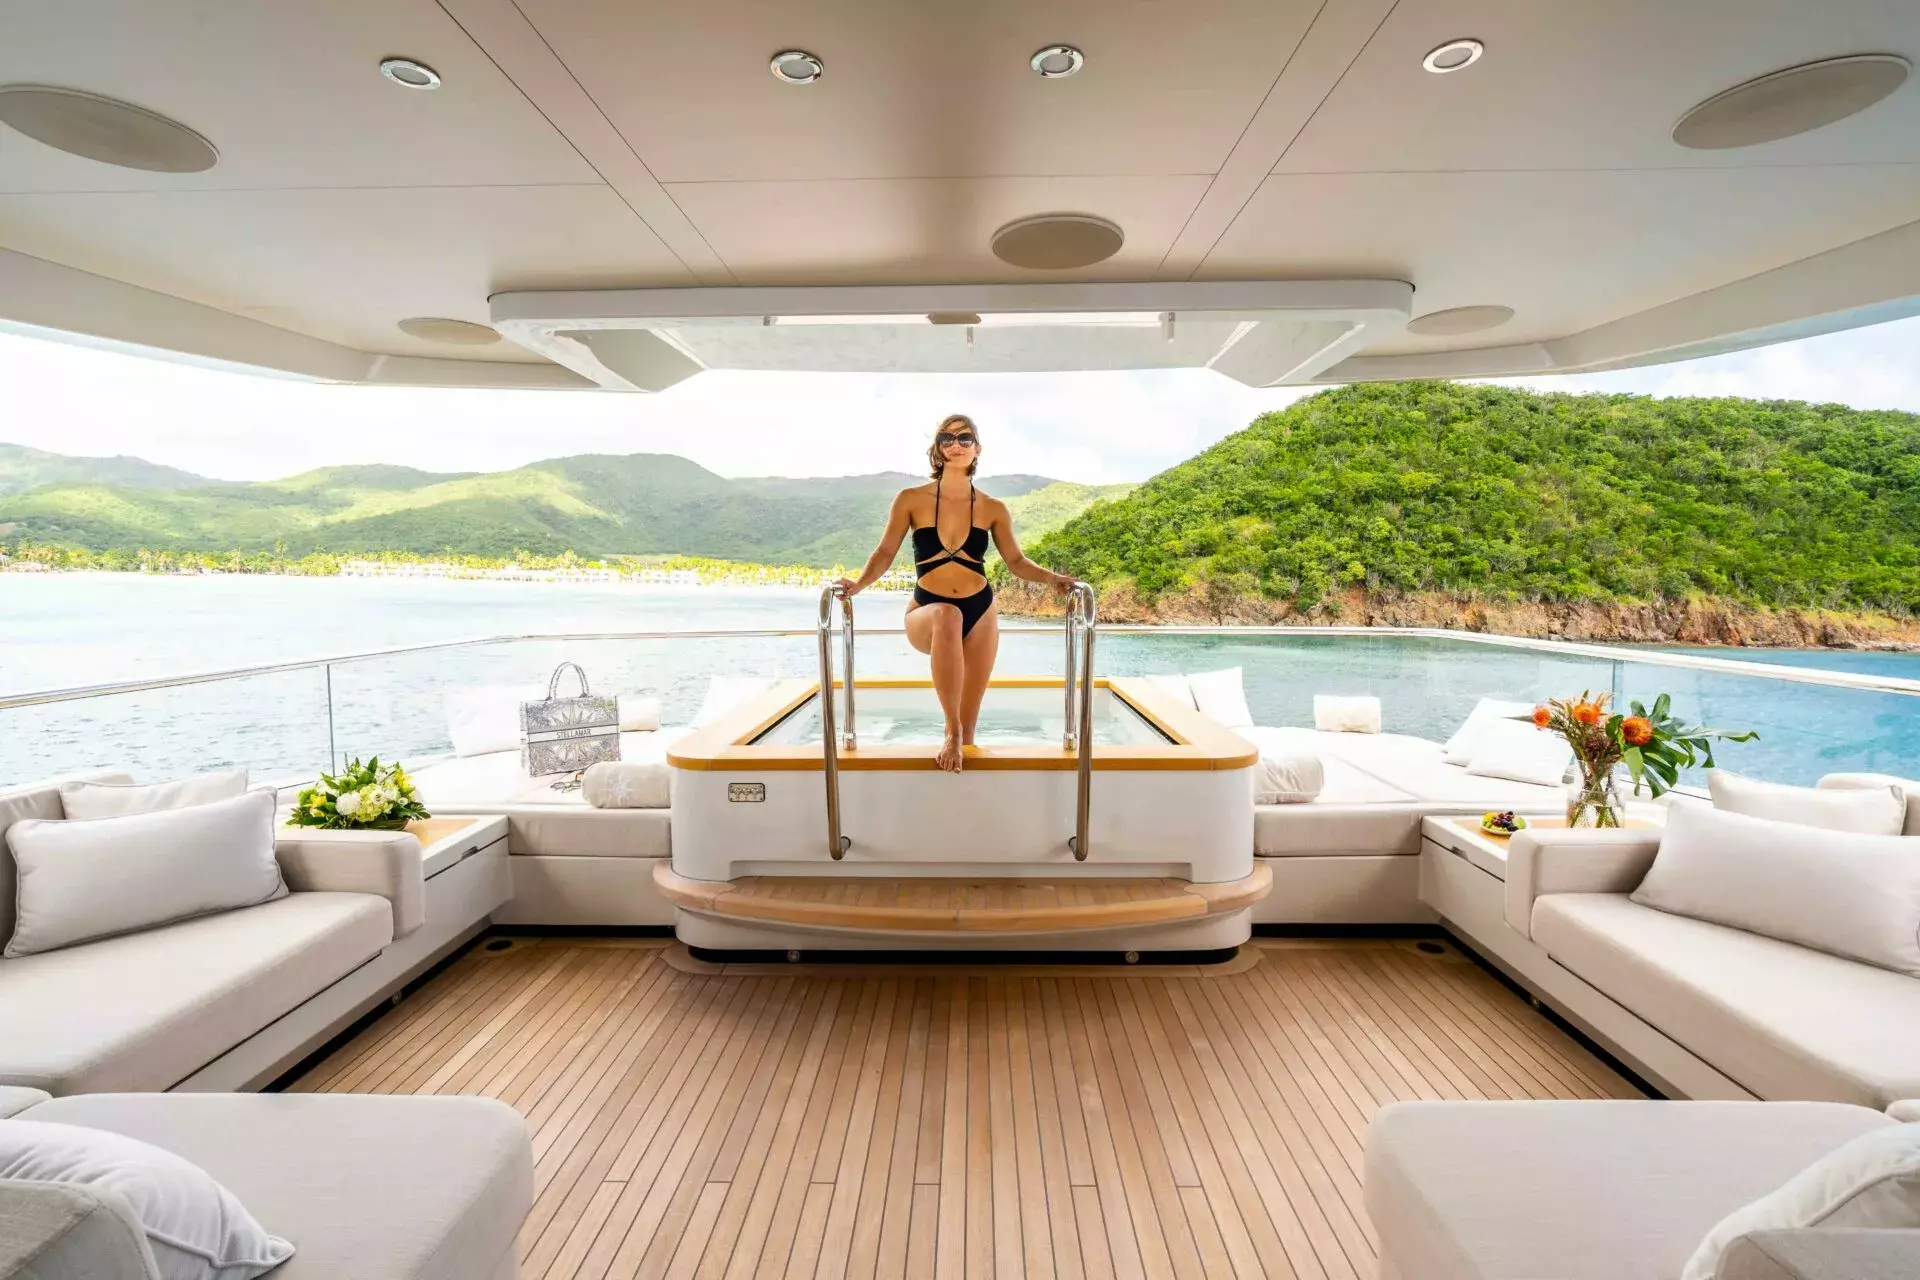 Stellamar by Cantiere Delle Marche - Top rates for a Charter of a private Superyacht in Turks and Caicos